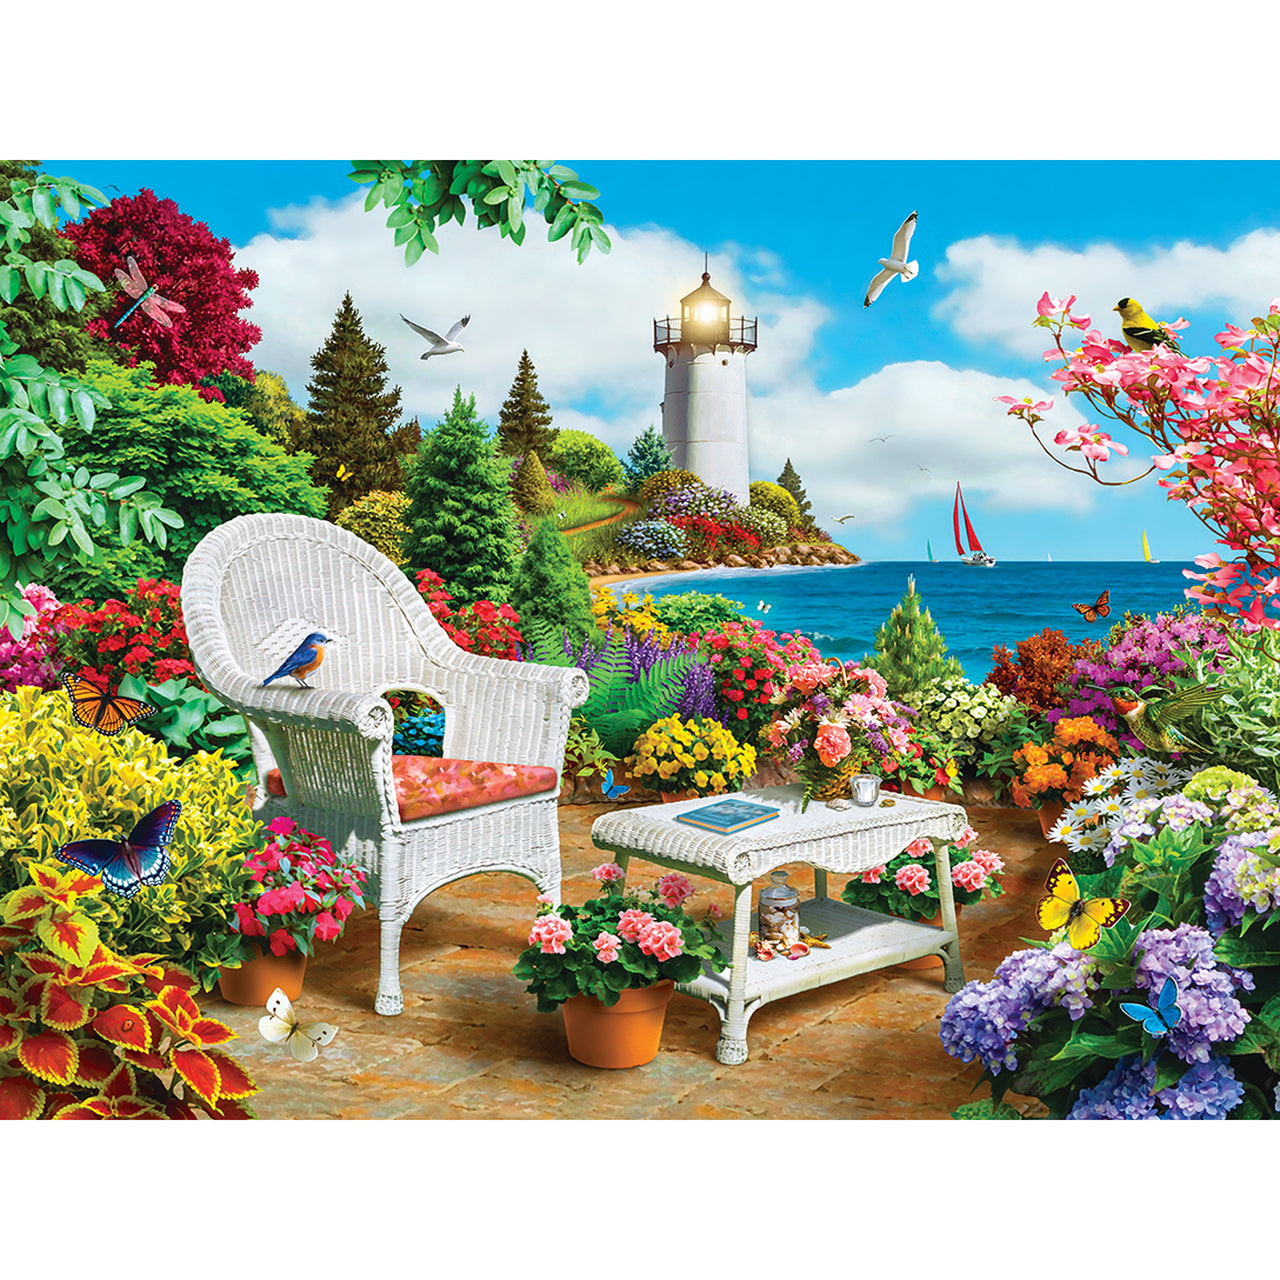 Lazy Days Memories 750 Piece Jigsaw Puzzle by MasterPieces